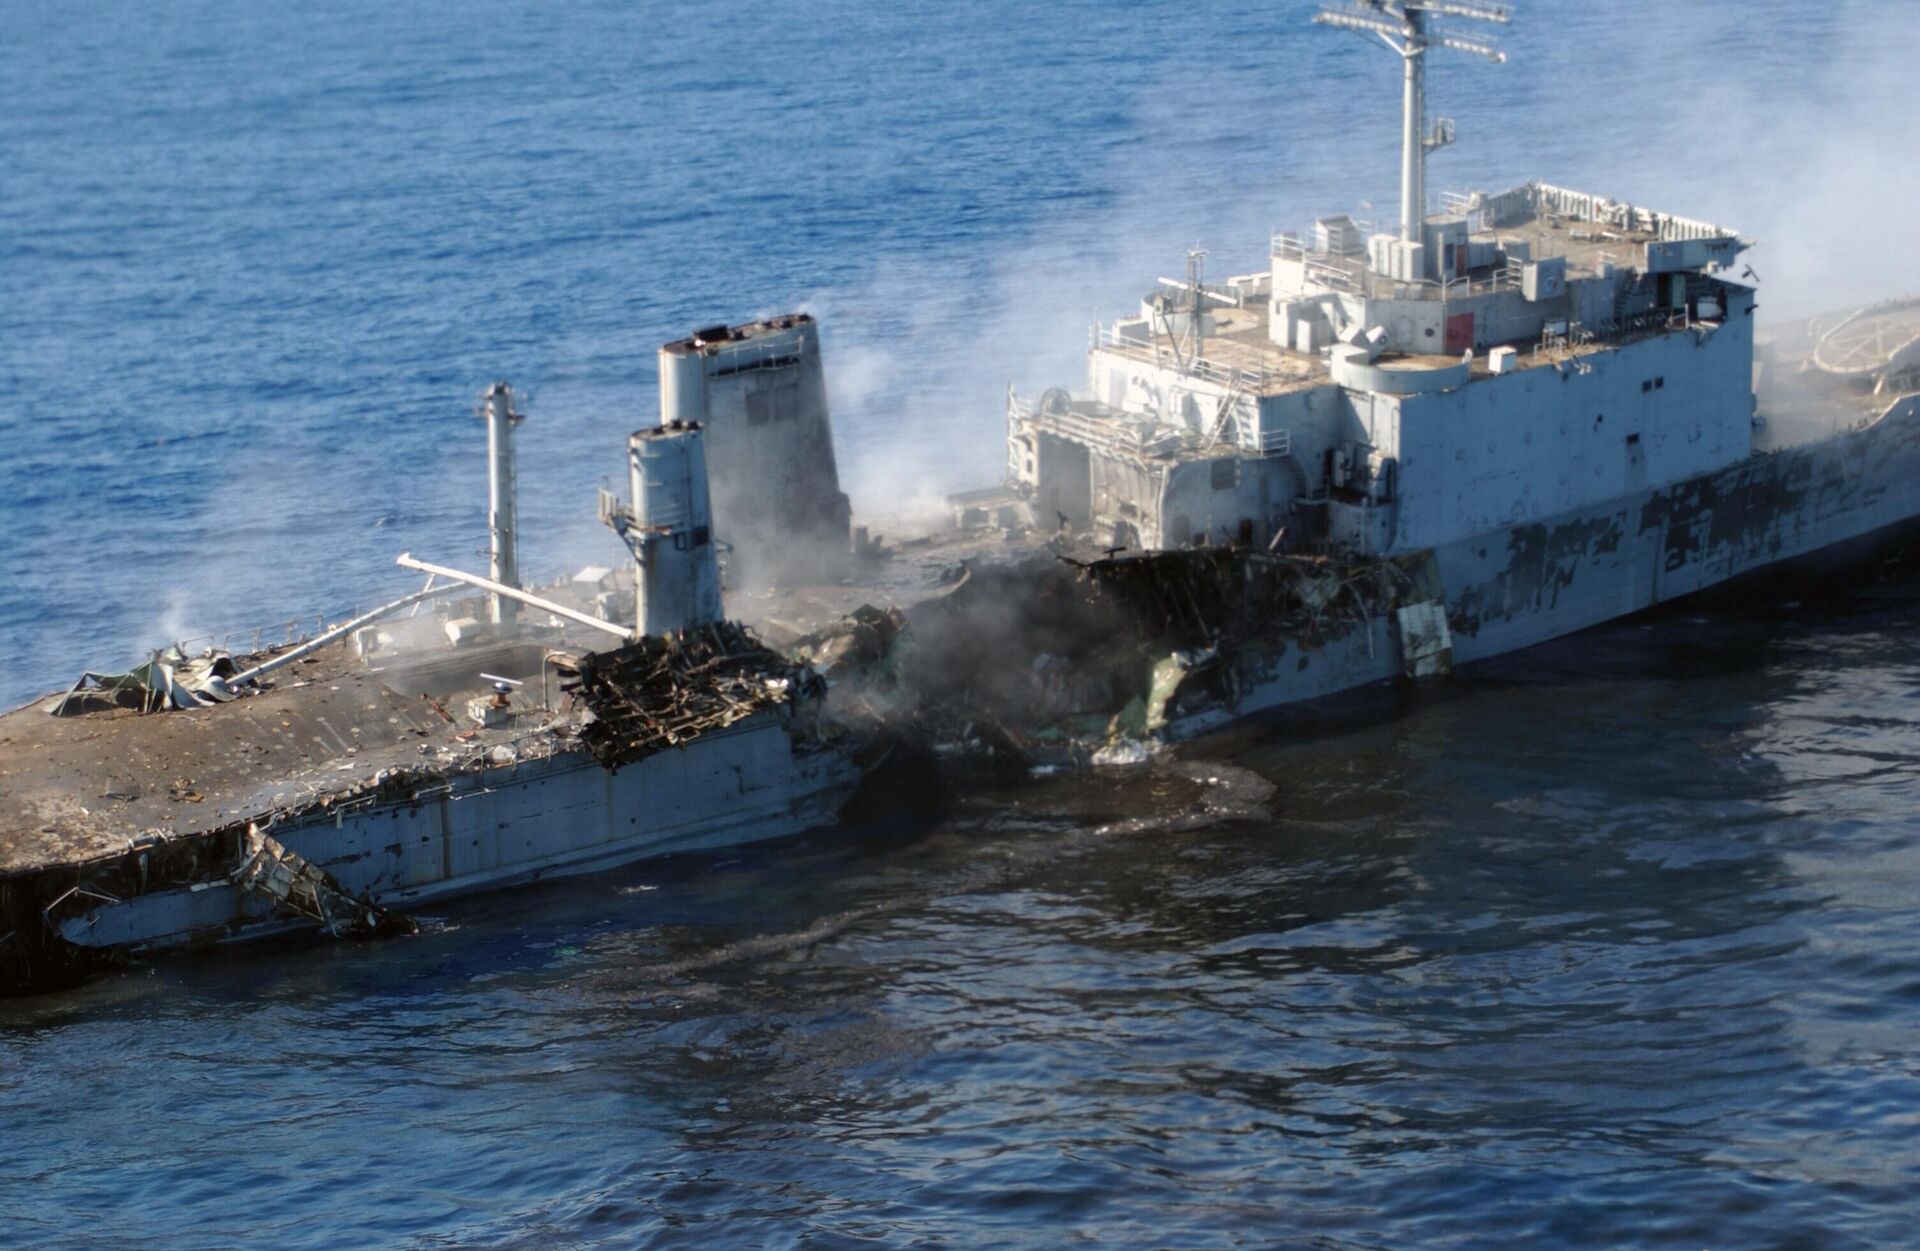 The USS SCHENECTADY, a 522-foot tank landing ship that was decommissioned in 1993, lists after being struck by seven 2,000lb Joint Defense Attack Munitions (JDAM) missiles during exercise Resultant Fury at the Pacific Missile Range Facility off the Island of Kauai, Hawaii, on Nov. 23, 2004. (USAF Photo by Tech. Sgt. Richard Freeland) (Released) Location: KAUAI, HAWAII (HI) UNITED STATES OF AMERICA (USA) - Sputnik International, 1920, 03.05.2022